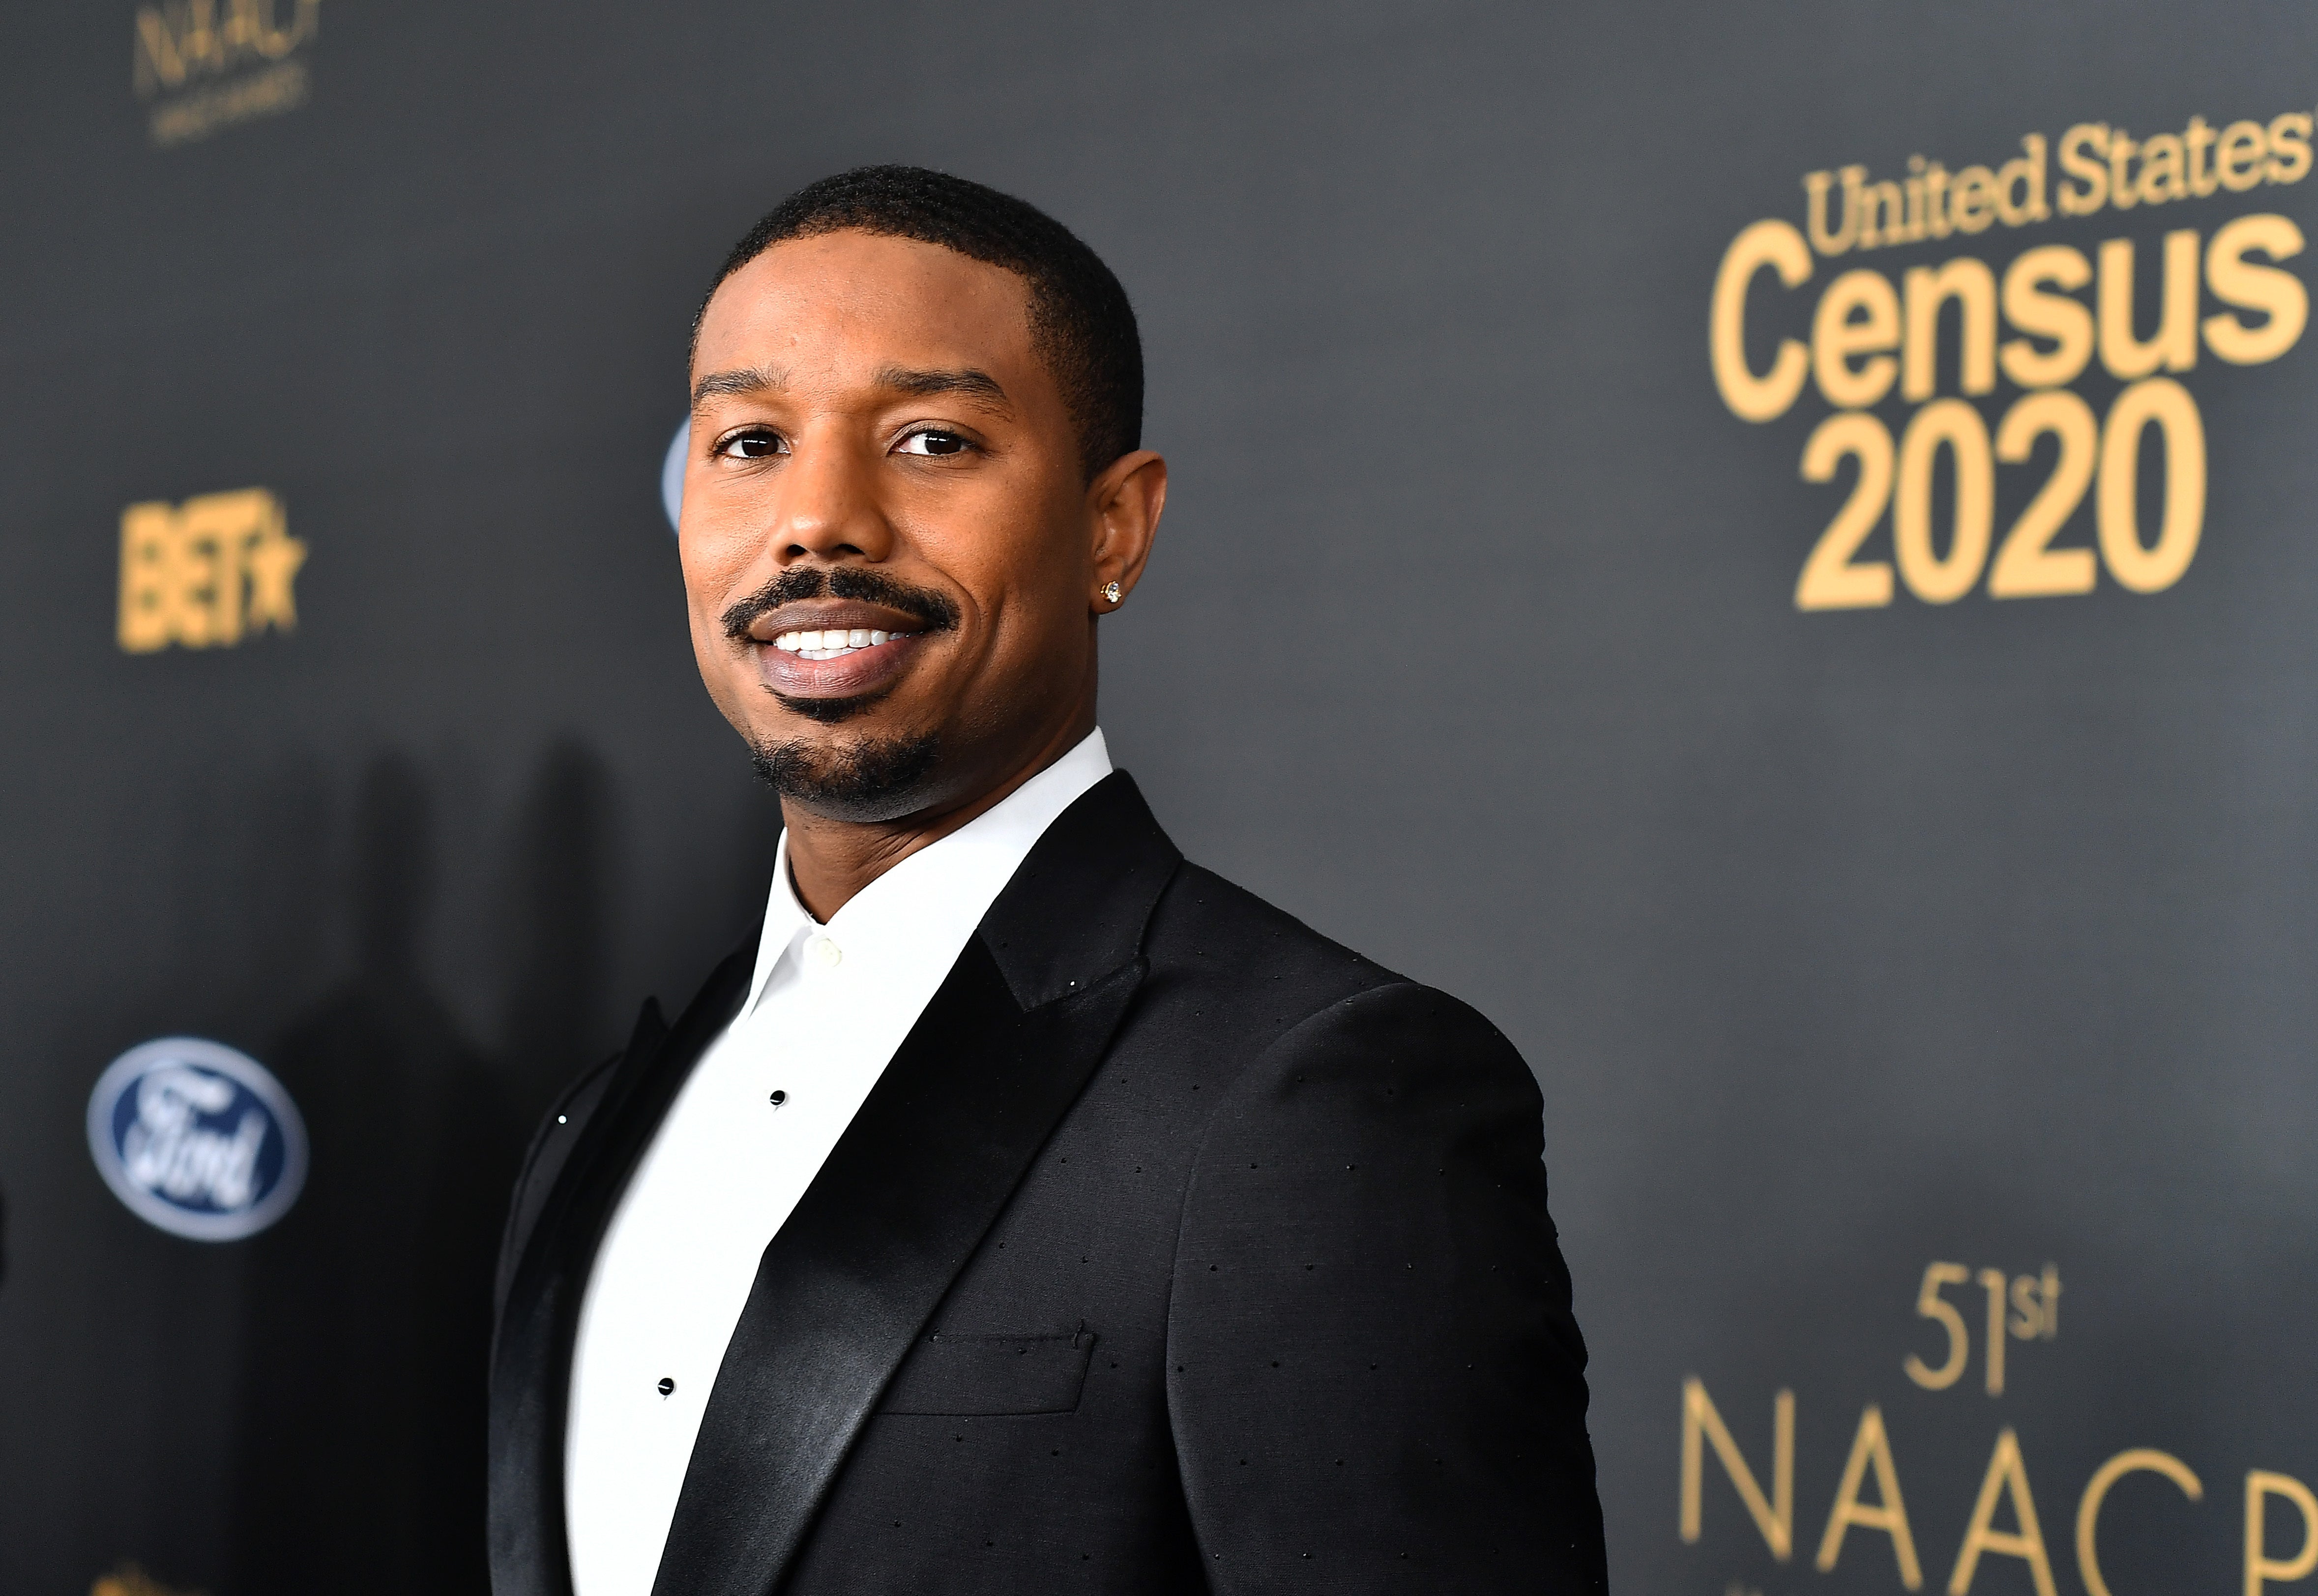 Michael B Jordan is reportedly developing a Black Superman series for HBO Max